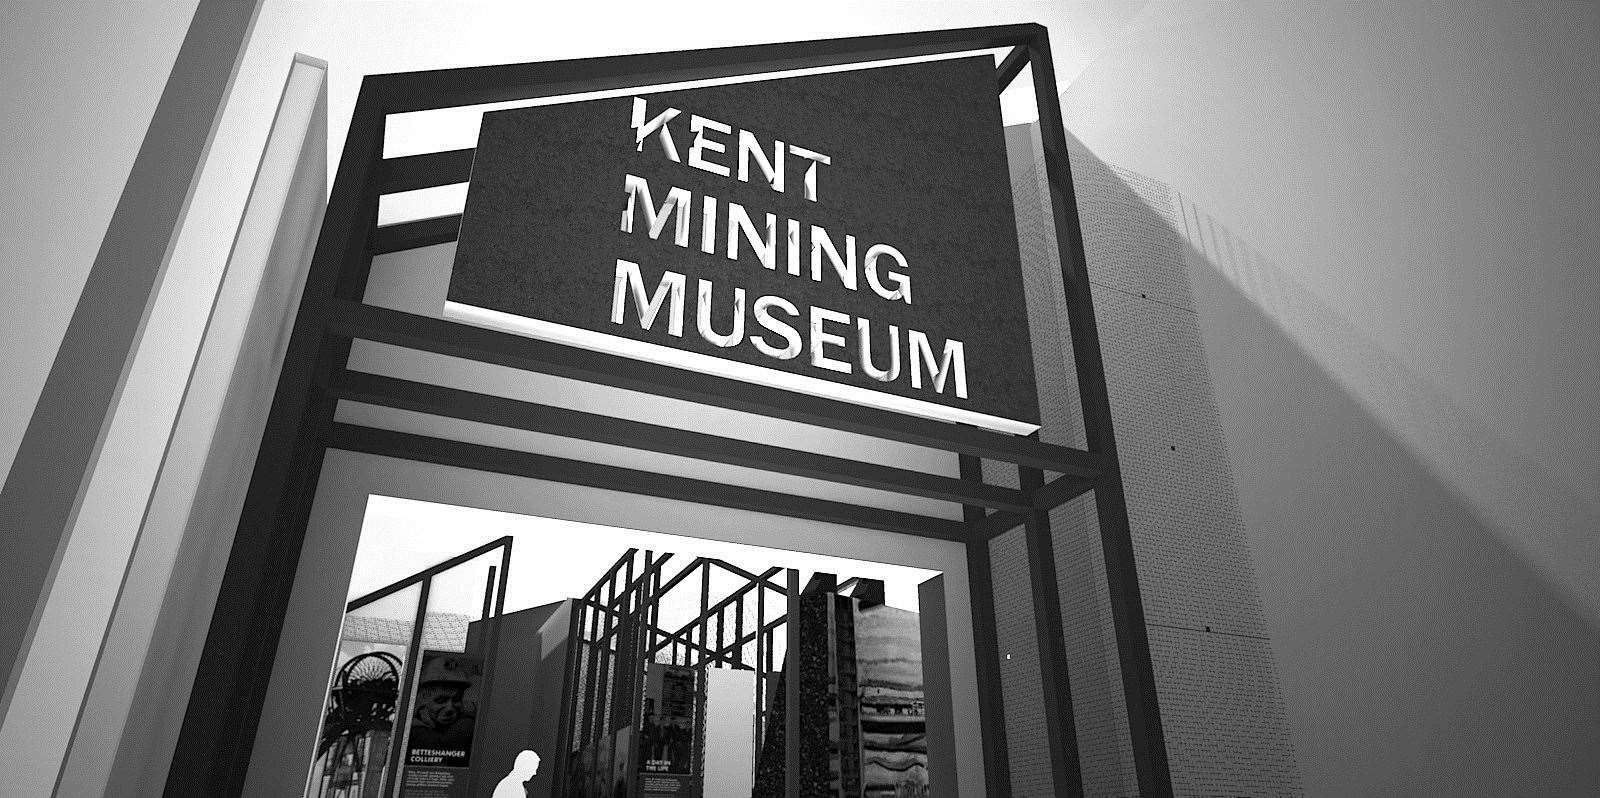 Kent Mining Museum opens today